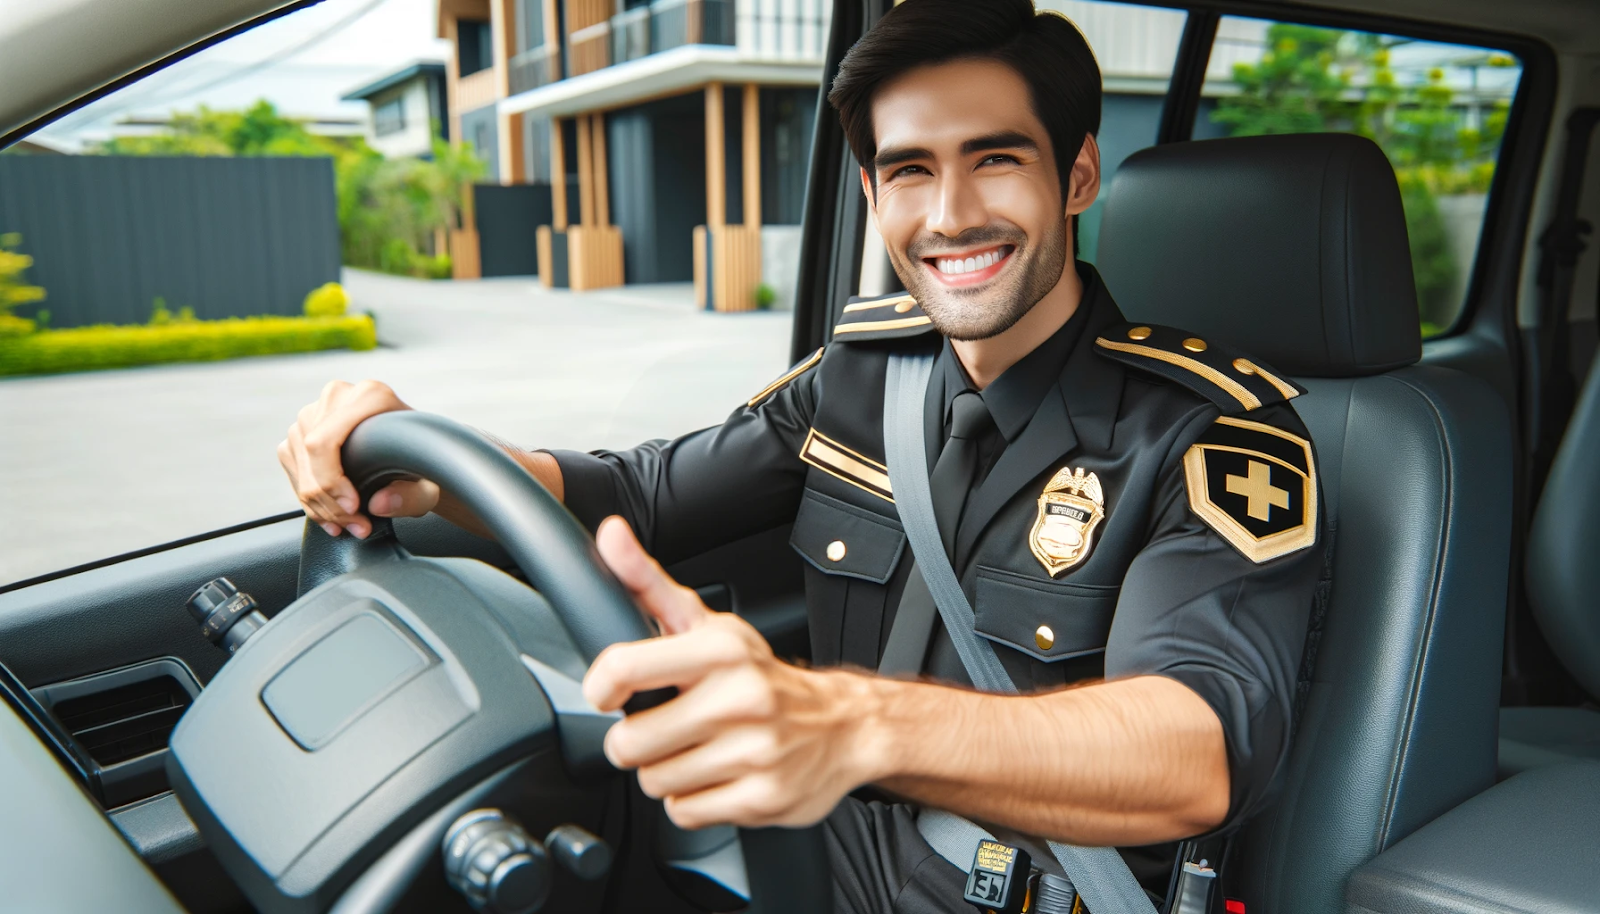 A cheerful security guard in a black and gold uniform driving a patrol car, emphasizing mobile security patrol safety.